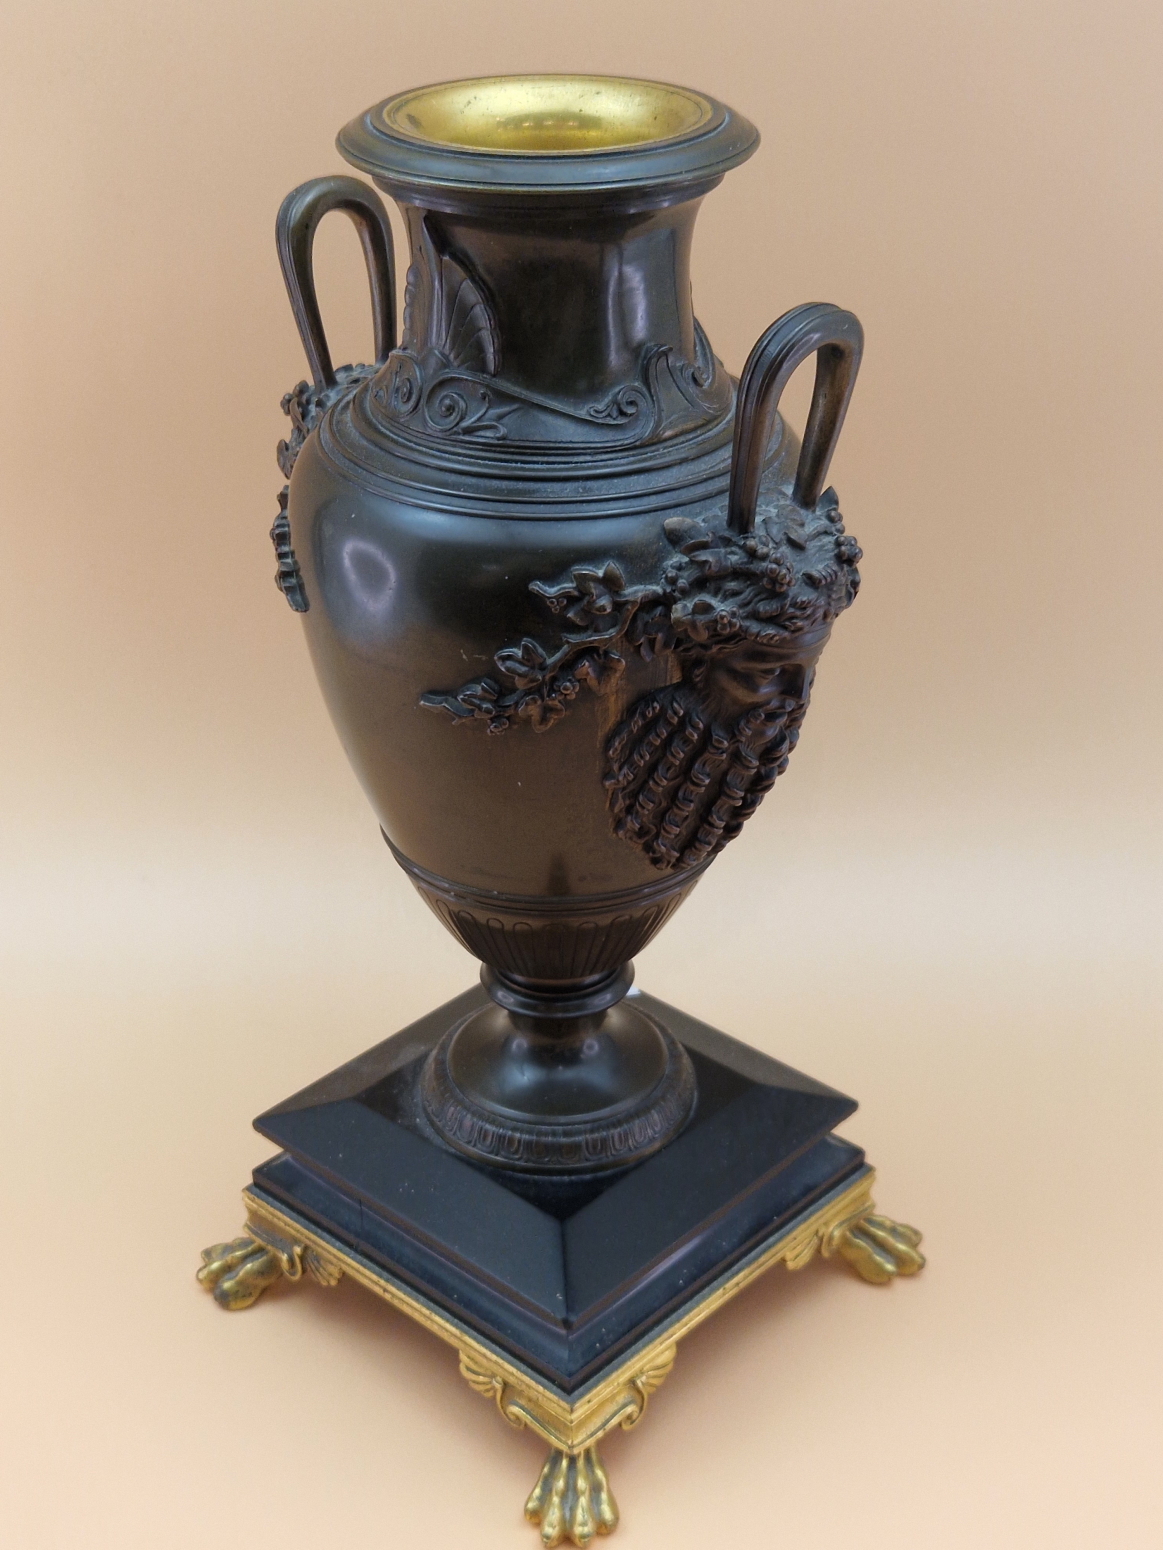 A BRONZE BALUSTER VASE, THE TWO HANDLES WITH BEARDED MASK TERMINALS, THE FOOT RESTING ON BLACK - Image 5 of 9